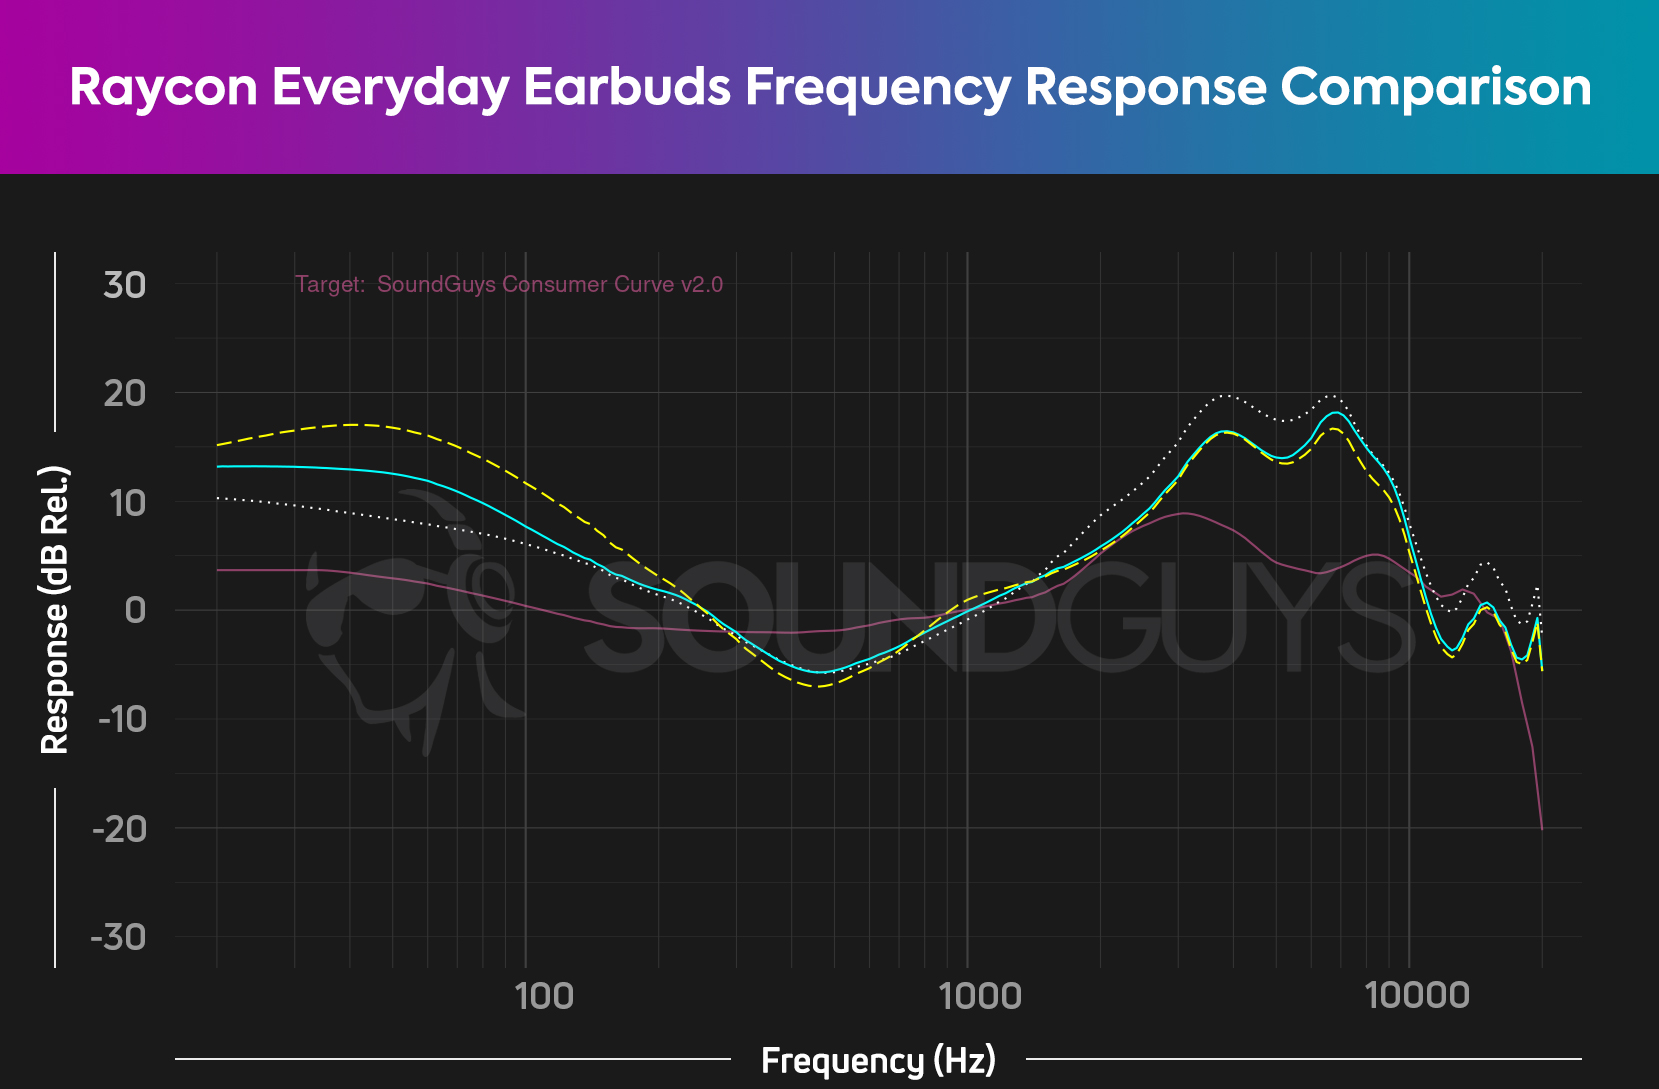 A frequency response chart for the Raycon Everyday Earbuds showing plots for the earbuds' three EQ profiles